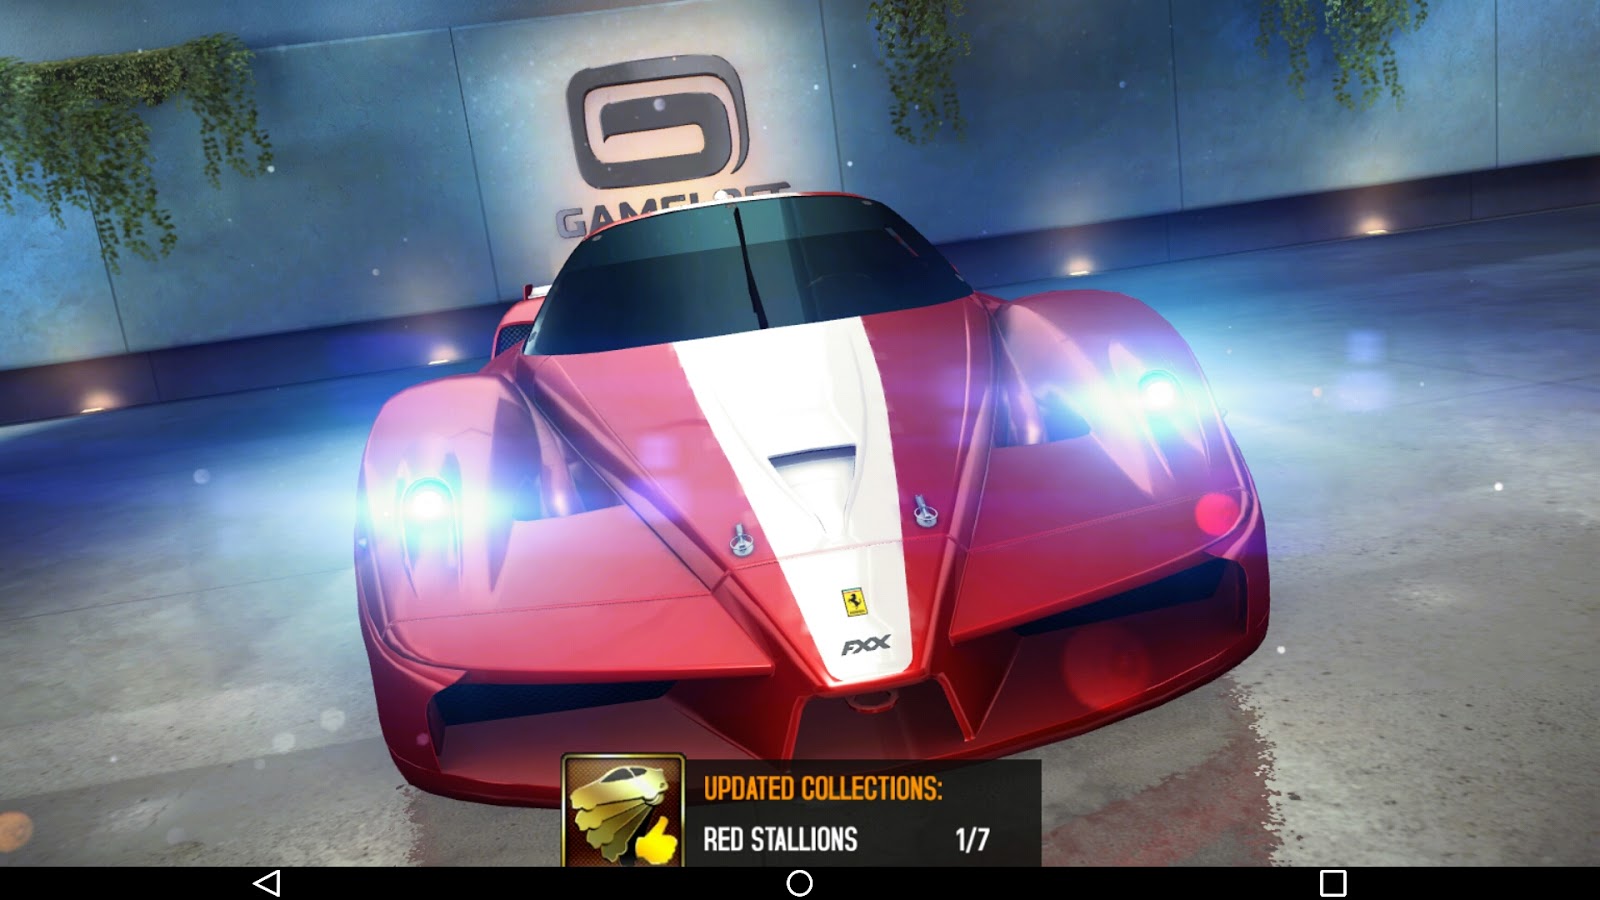 Download Asphalt 8 mod unlimited money and coins ~ FREE ANDROID GAMING